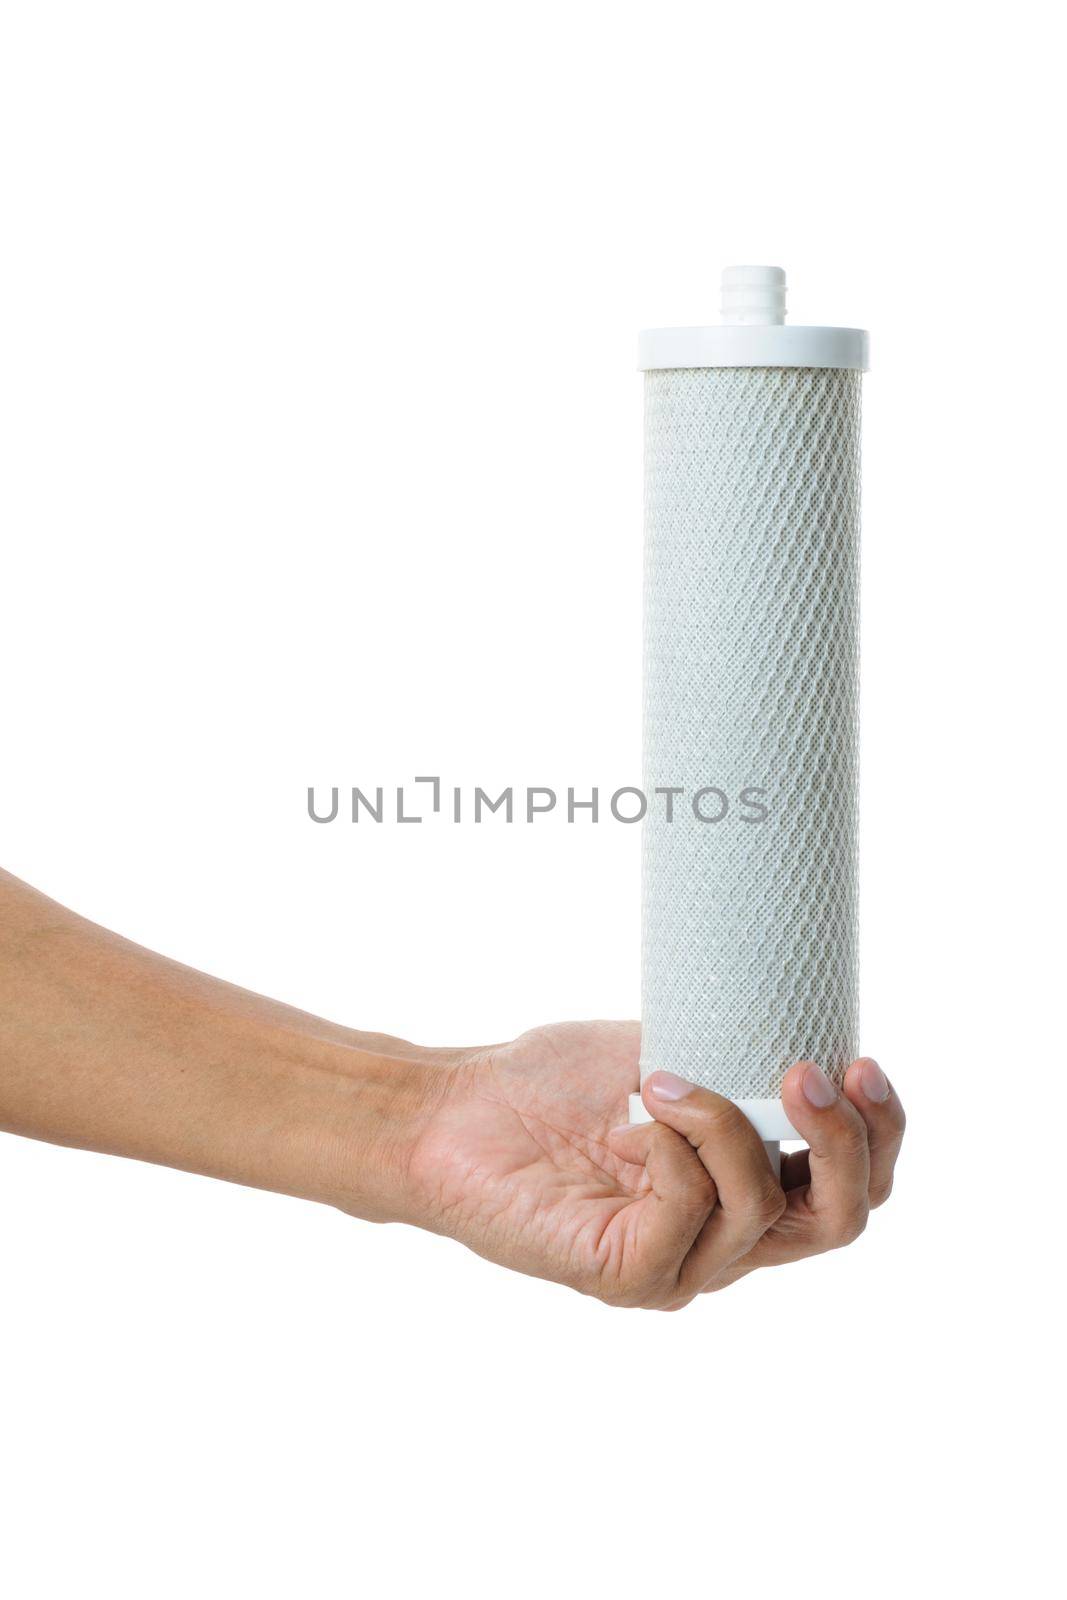 used water filter in human hand